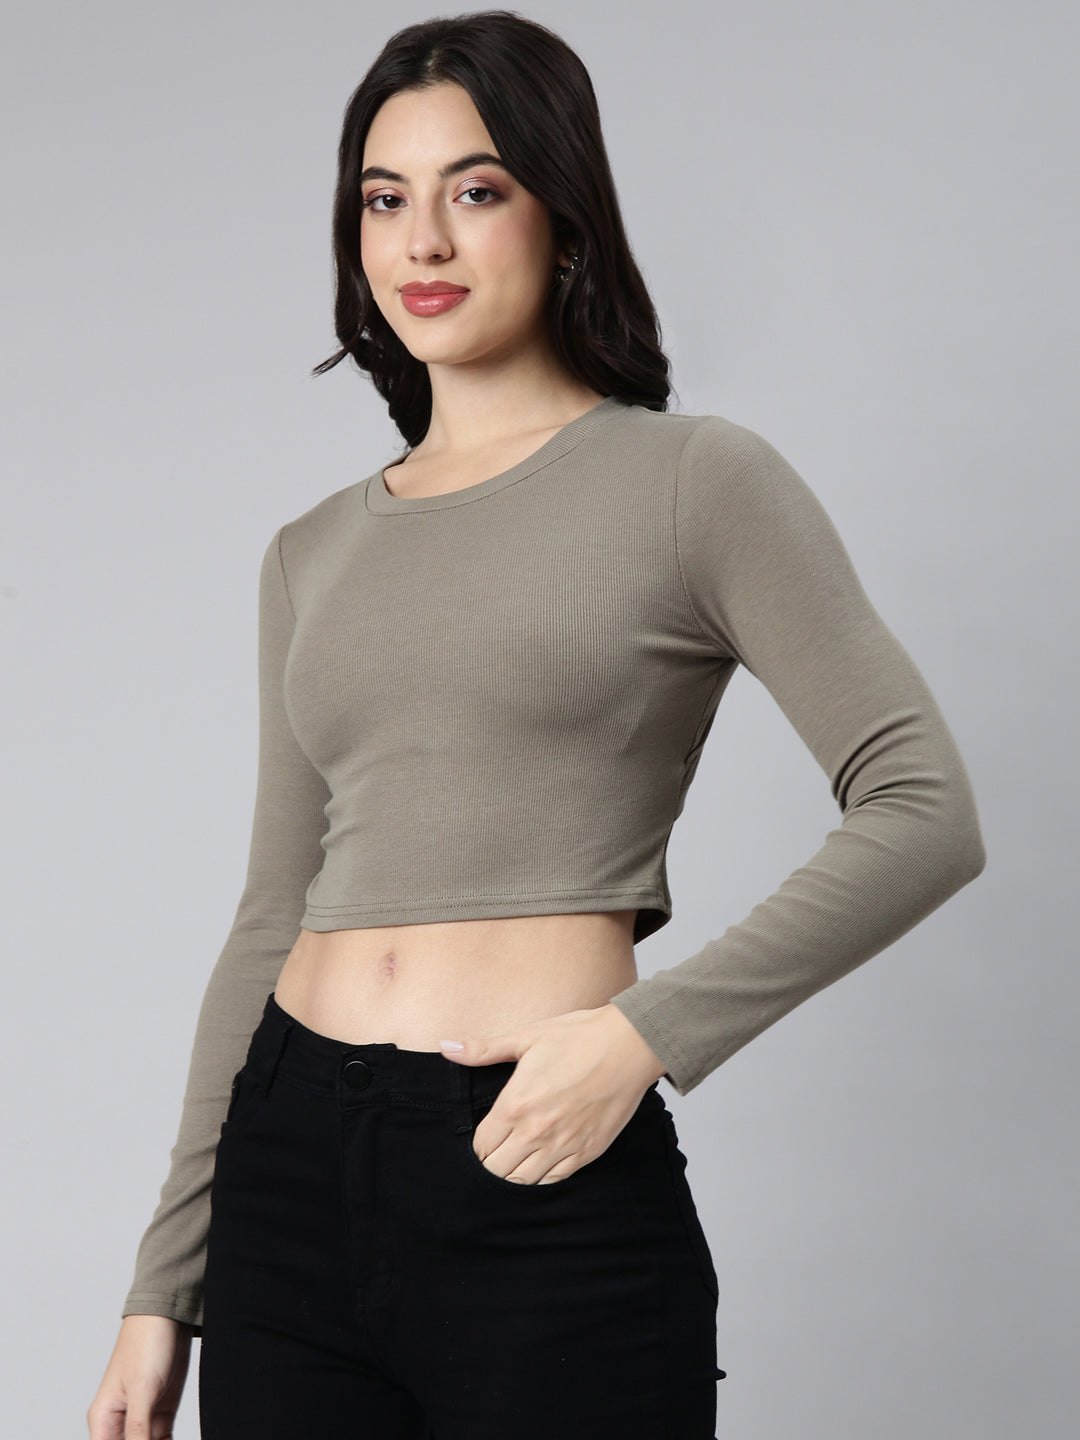 Women Solid Olive Styled Back Crop Top